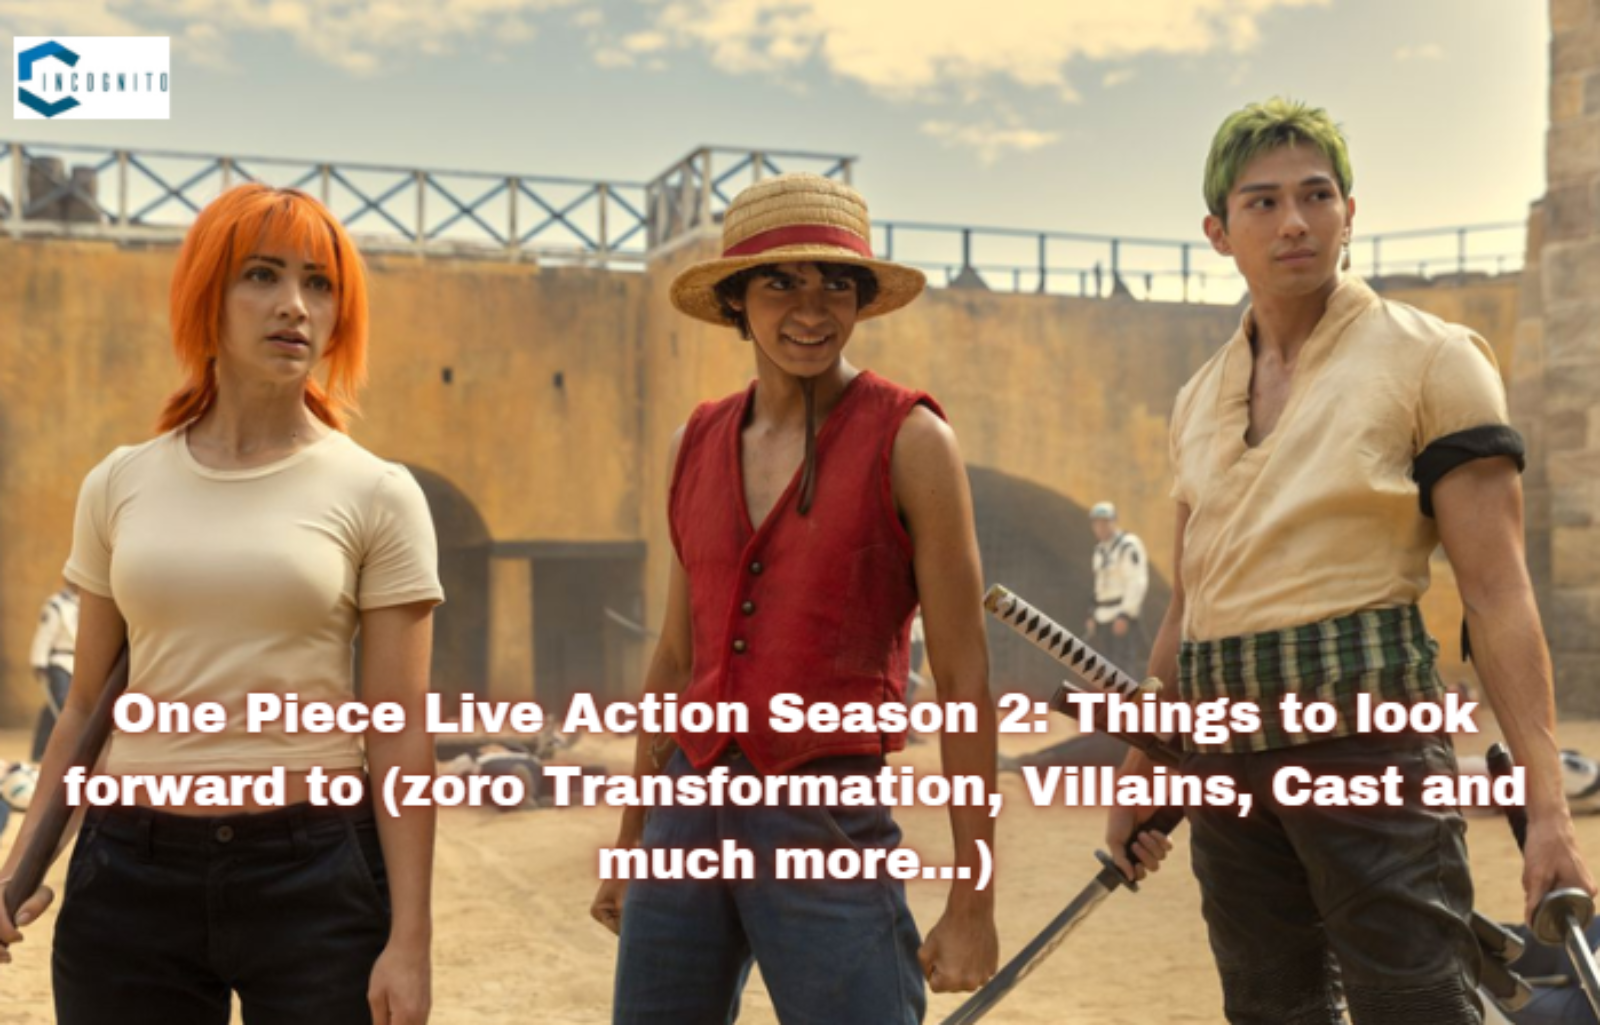 One Piece Live Action Season 2: Things to look forward to (Zoro Transformation, Villains, Cast, and much more…)